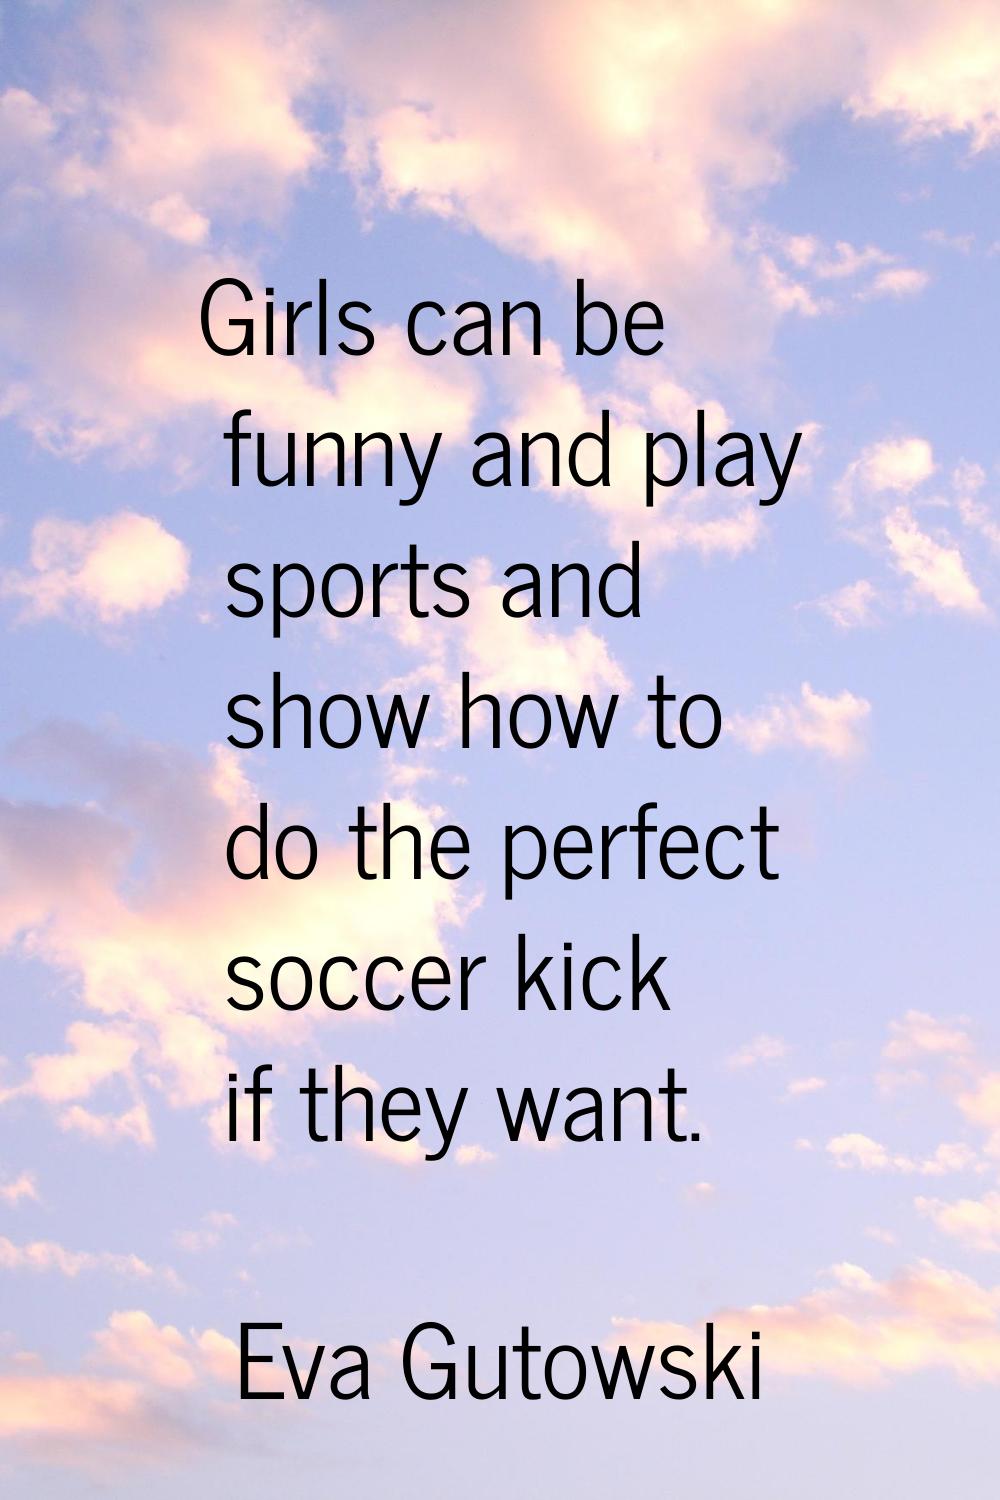 Girls can be funny and play sports and show how to do the perfect soccer kick if they want.